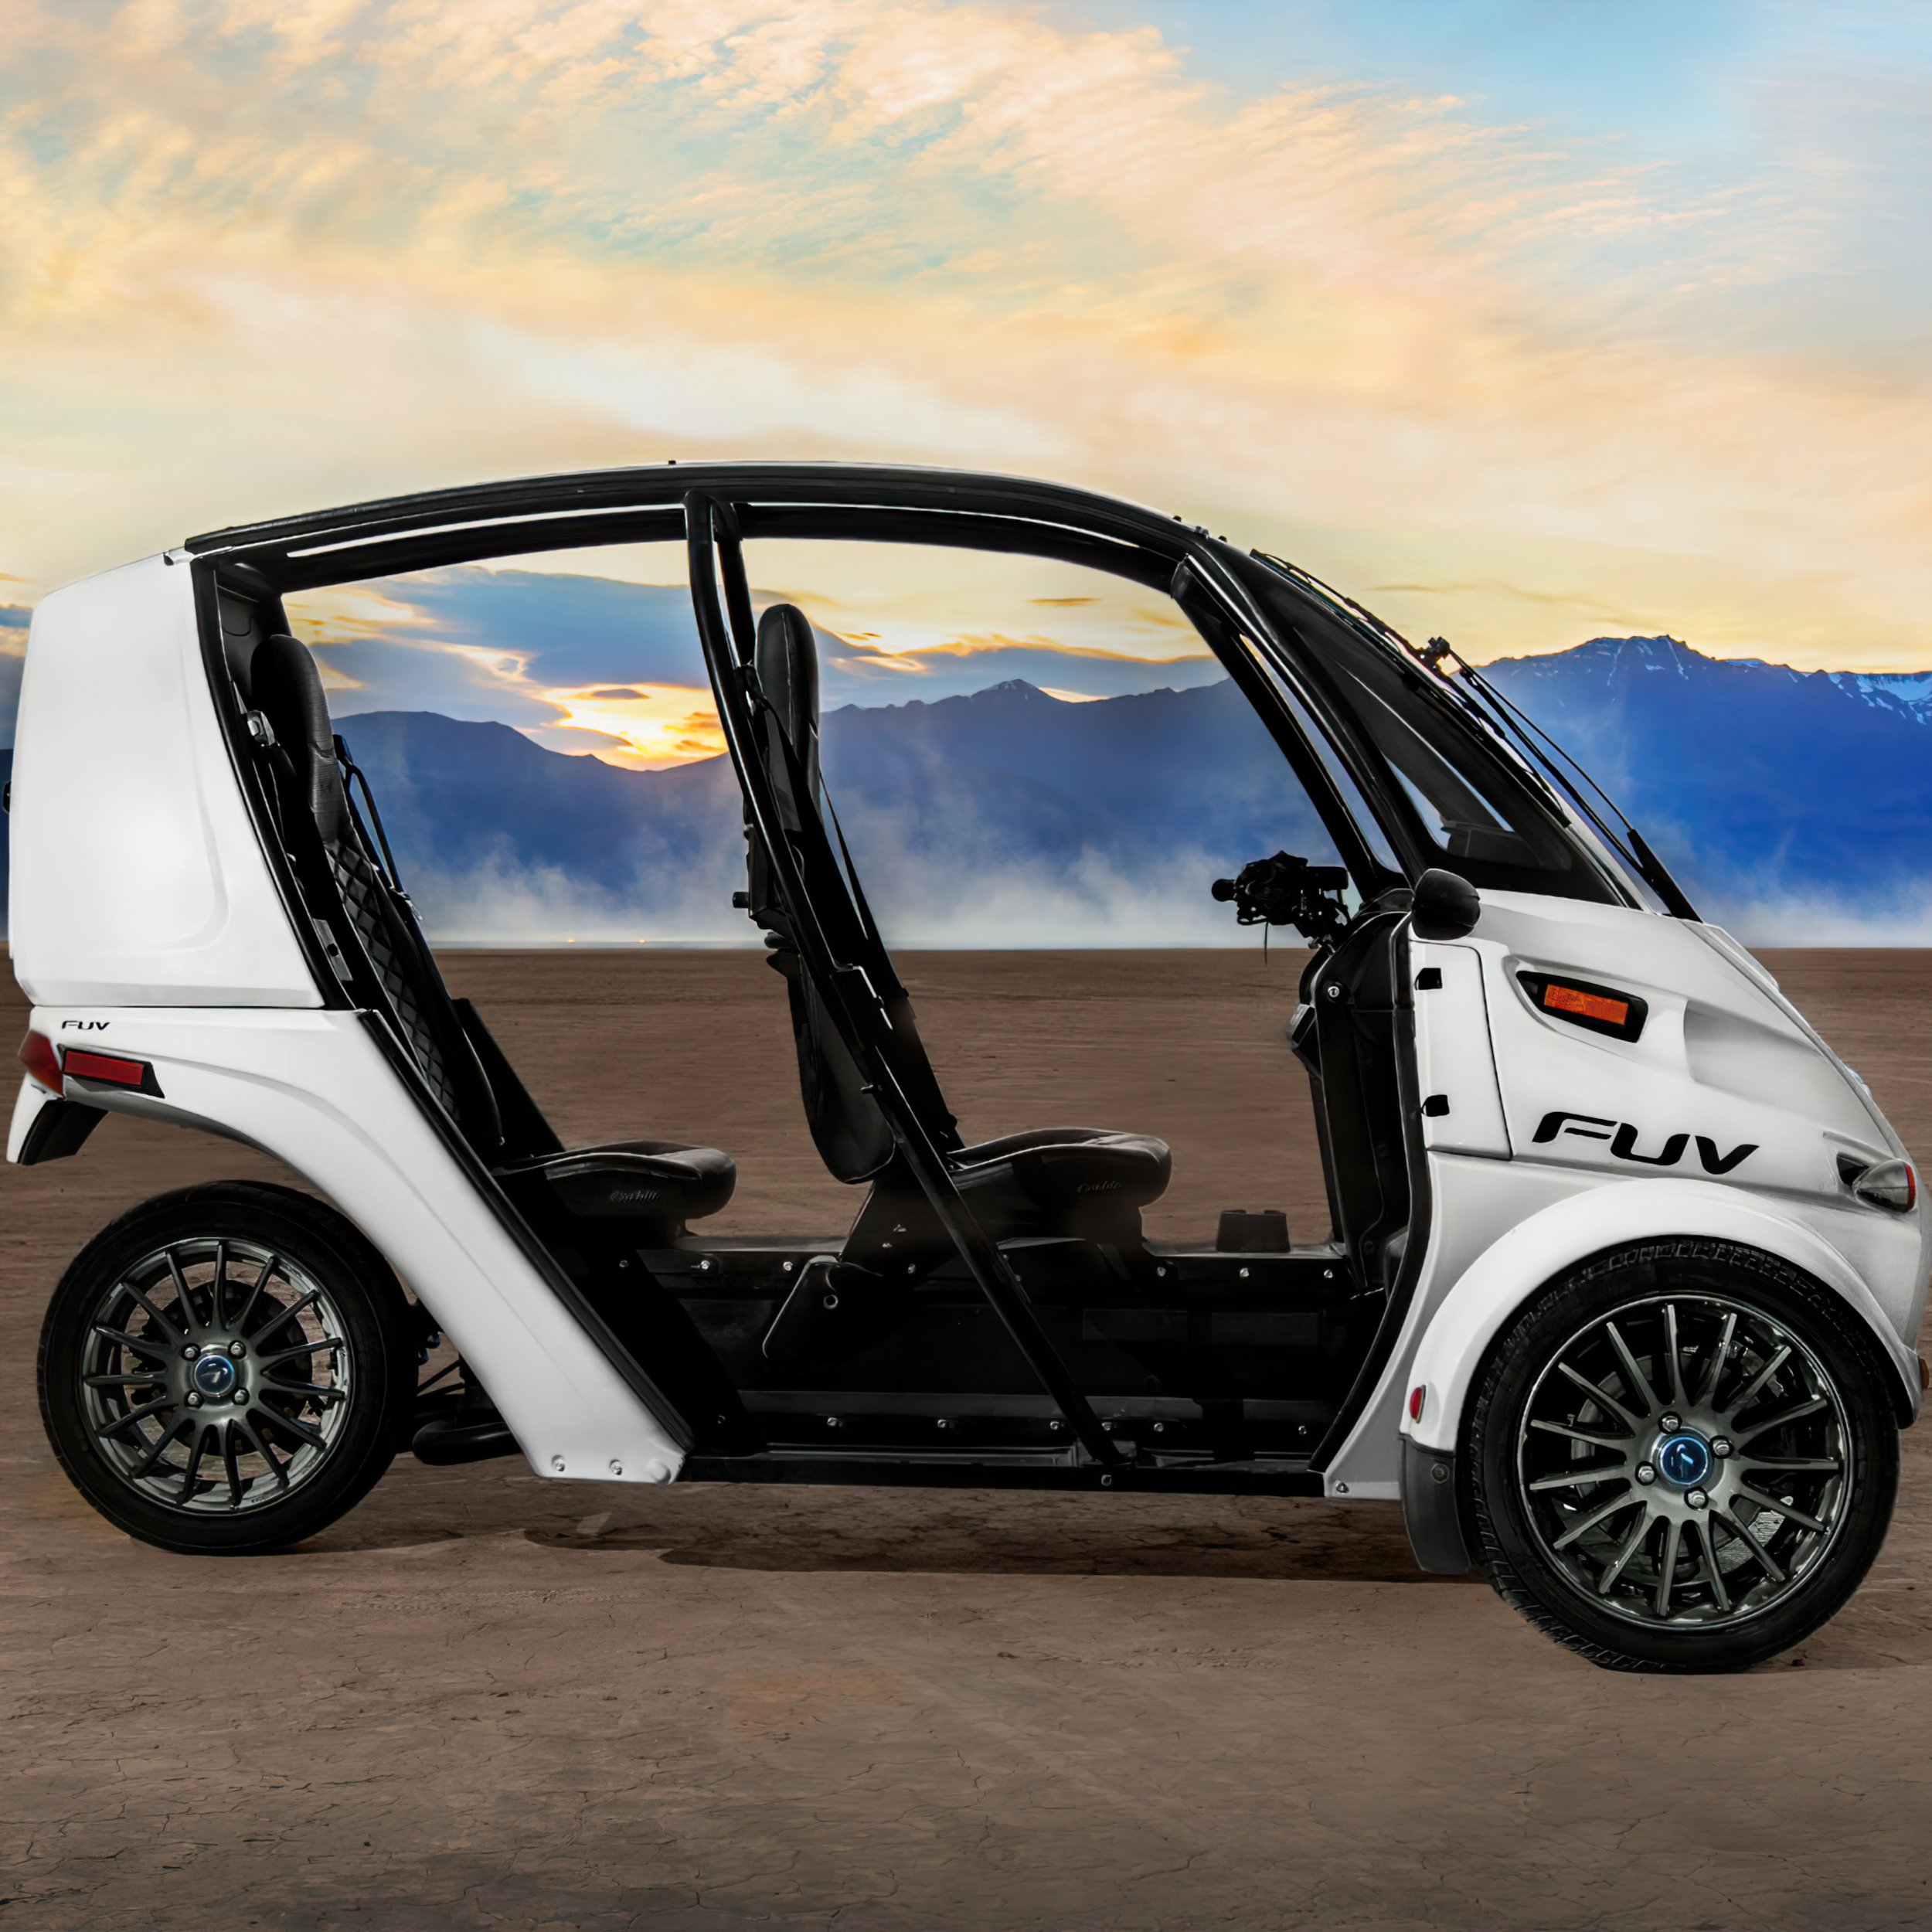  They think that we must rethink how we eat, live, and drive. Arcimoto believes in a transition to smaller EVs like the FUV. 